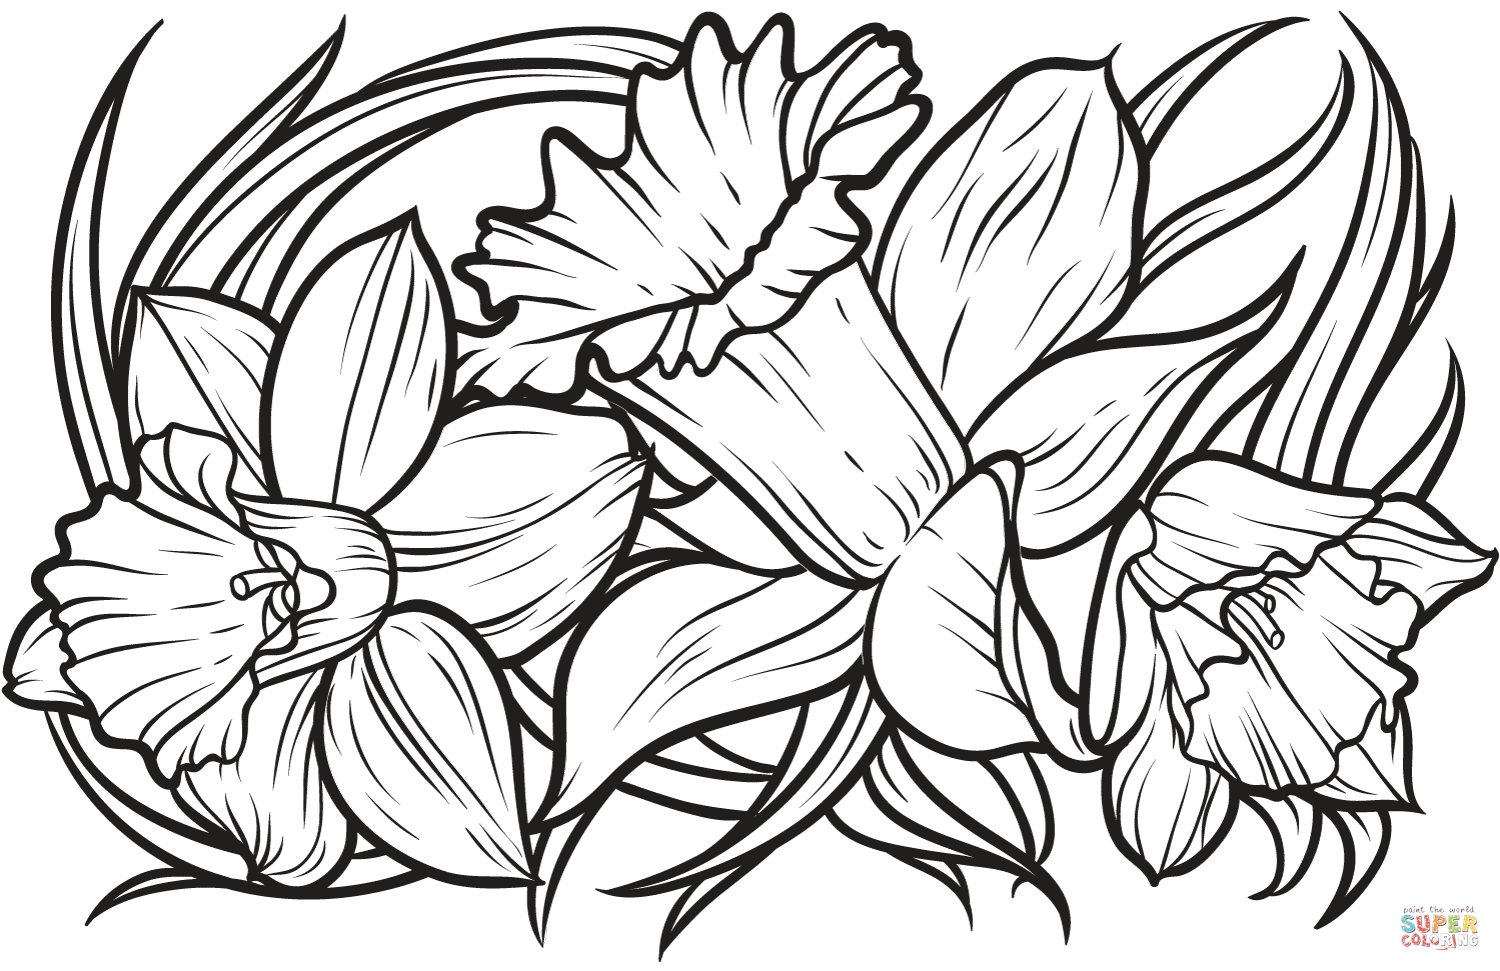 Daffodil coloring page free printable coloring pages easy coloring pages adult coloring pages coloring pages